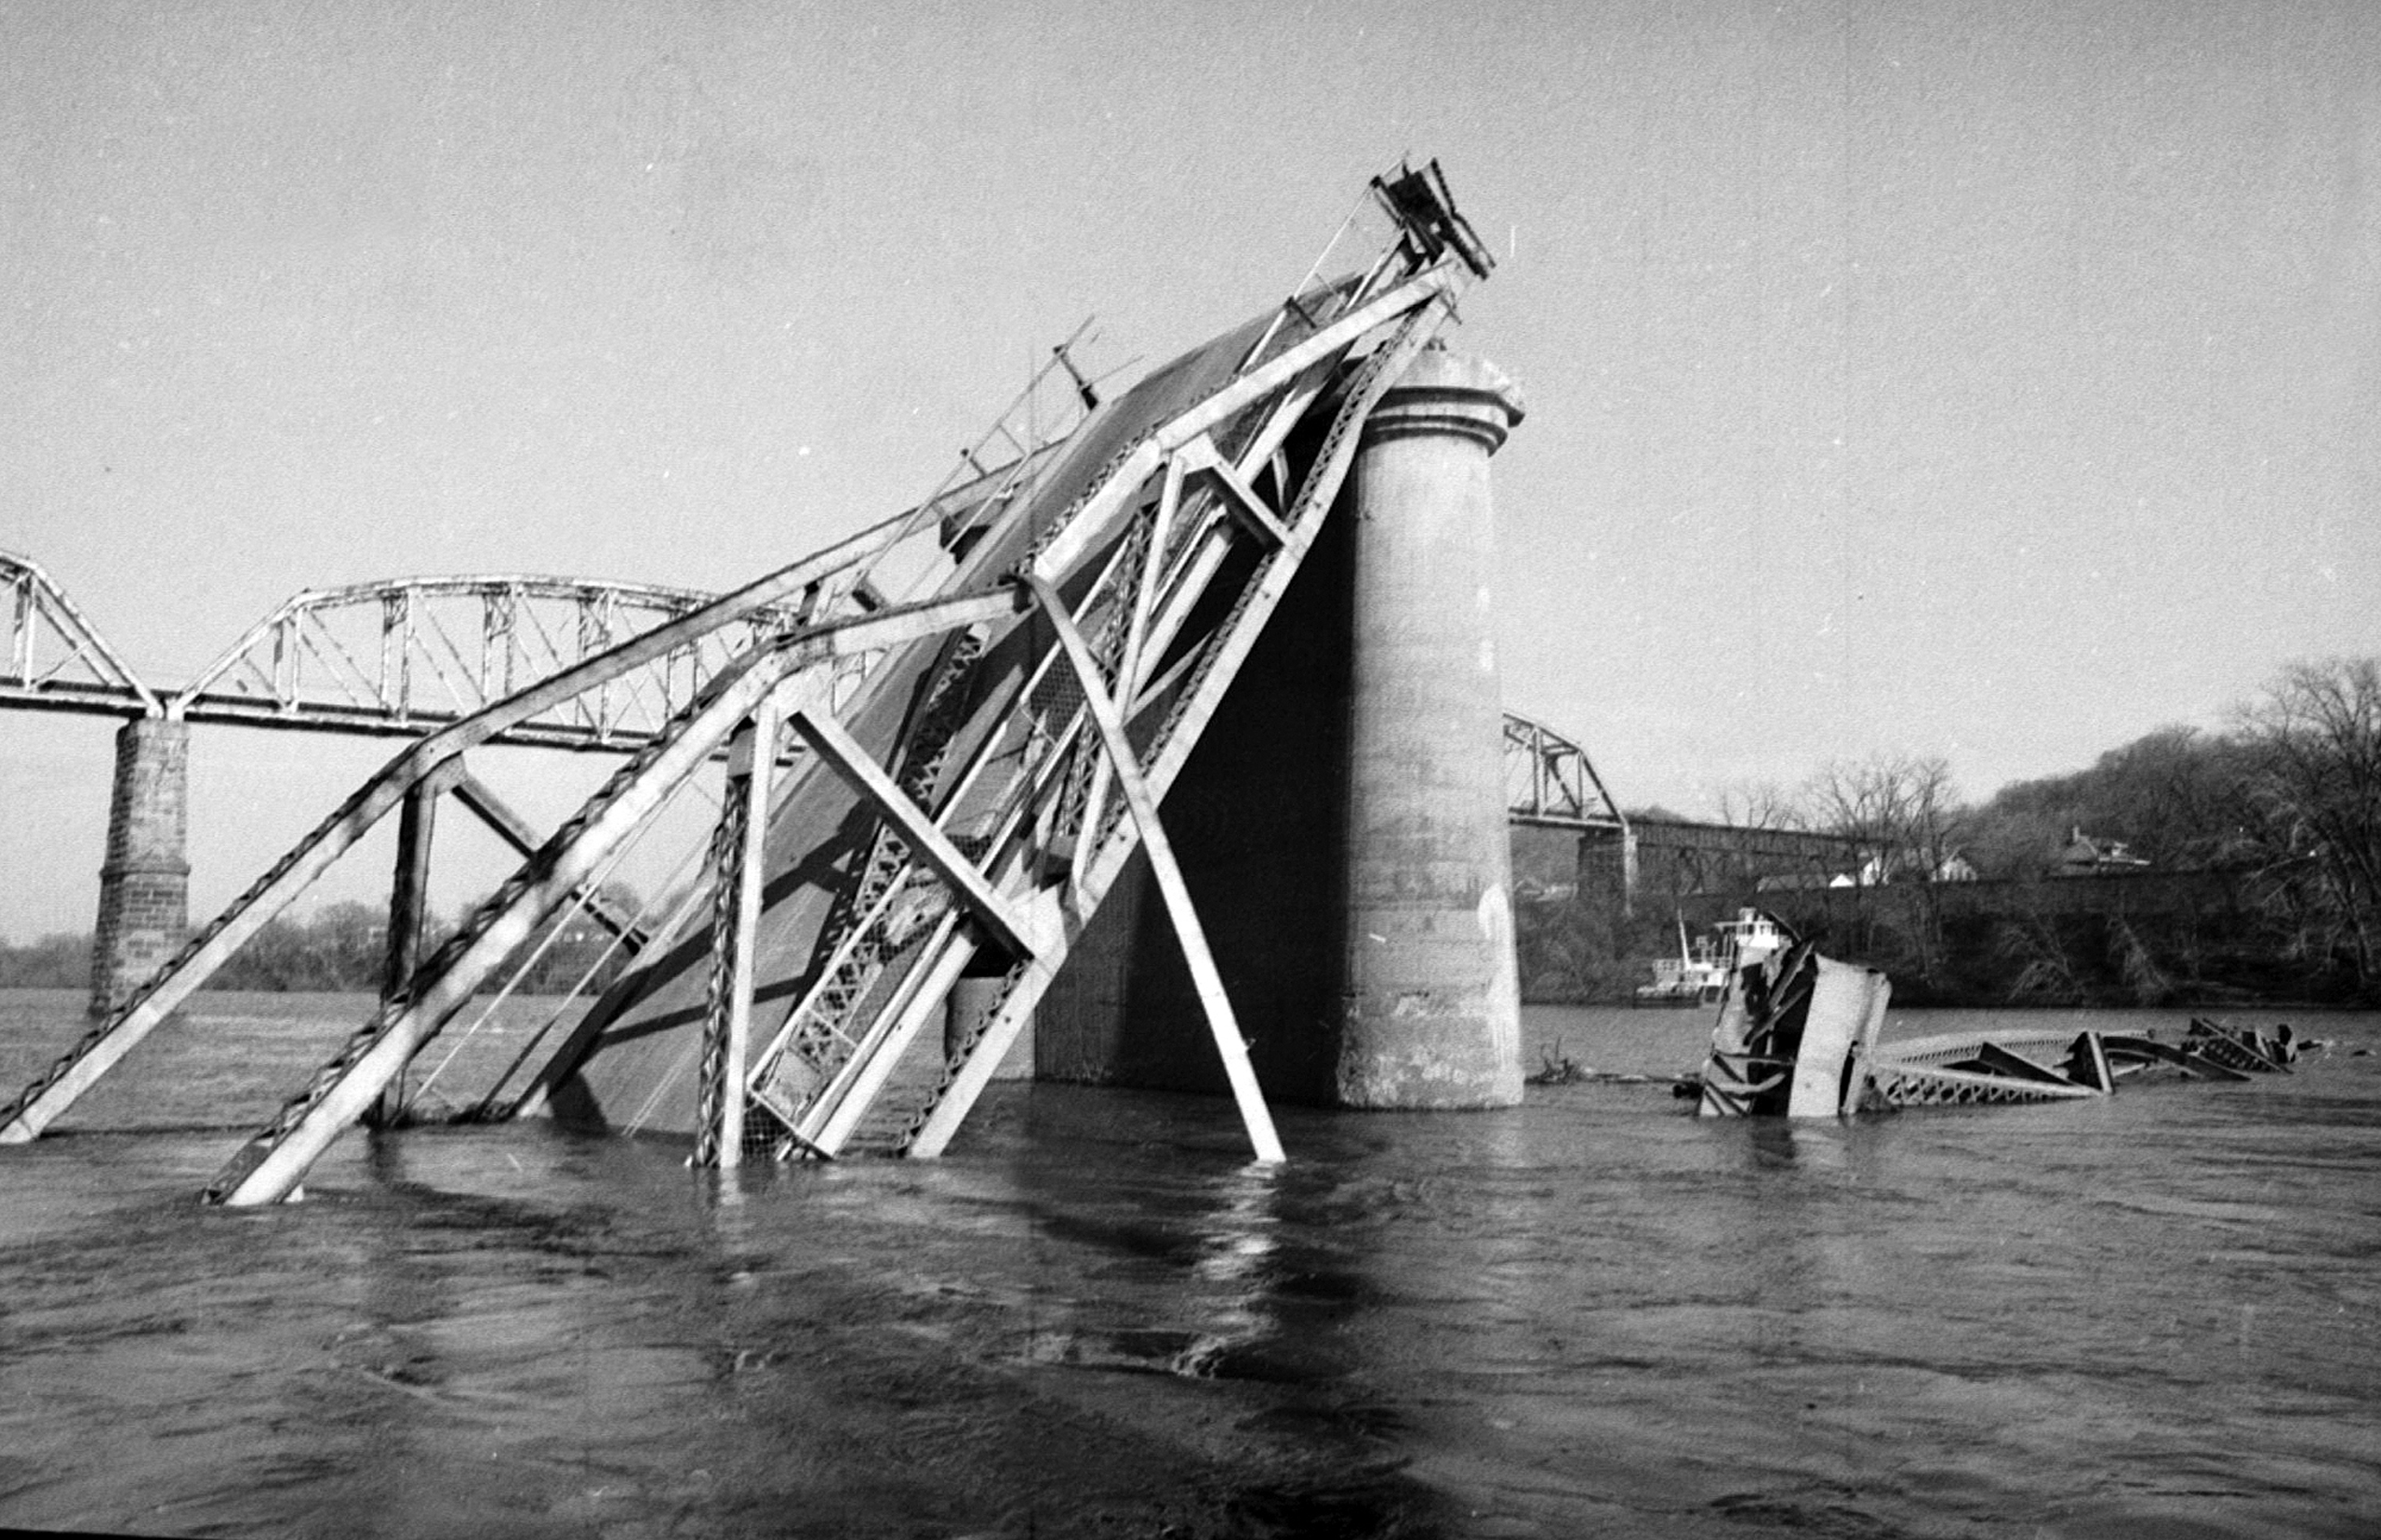 Wreckage from the Silver Bridge collapse at Point Pleasant, W.Va. (The Herald-Dispatch Archive—AP)